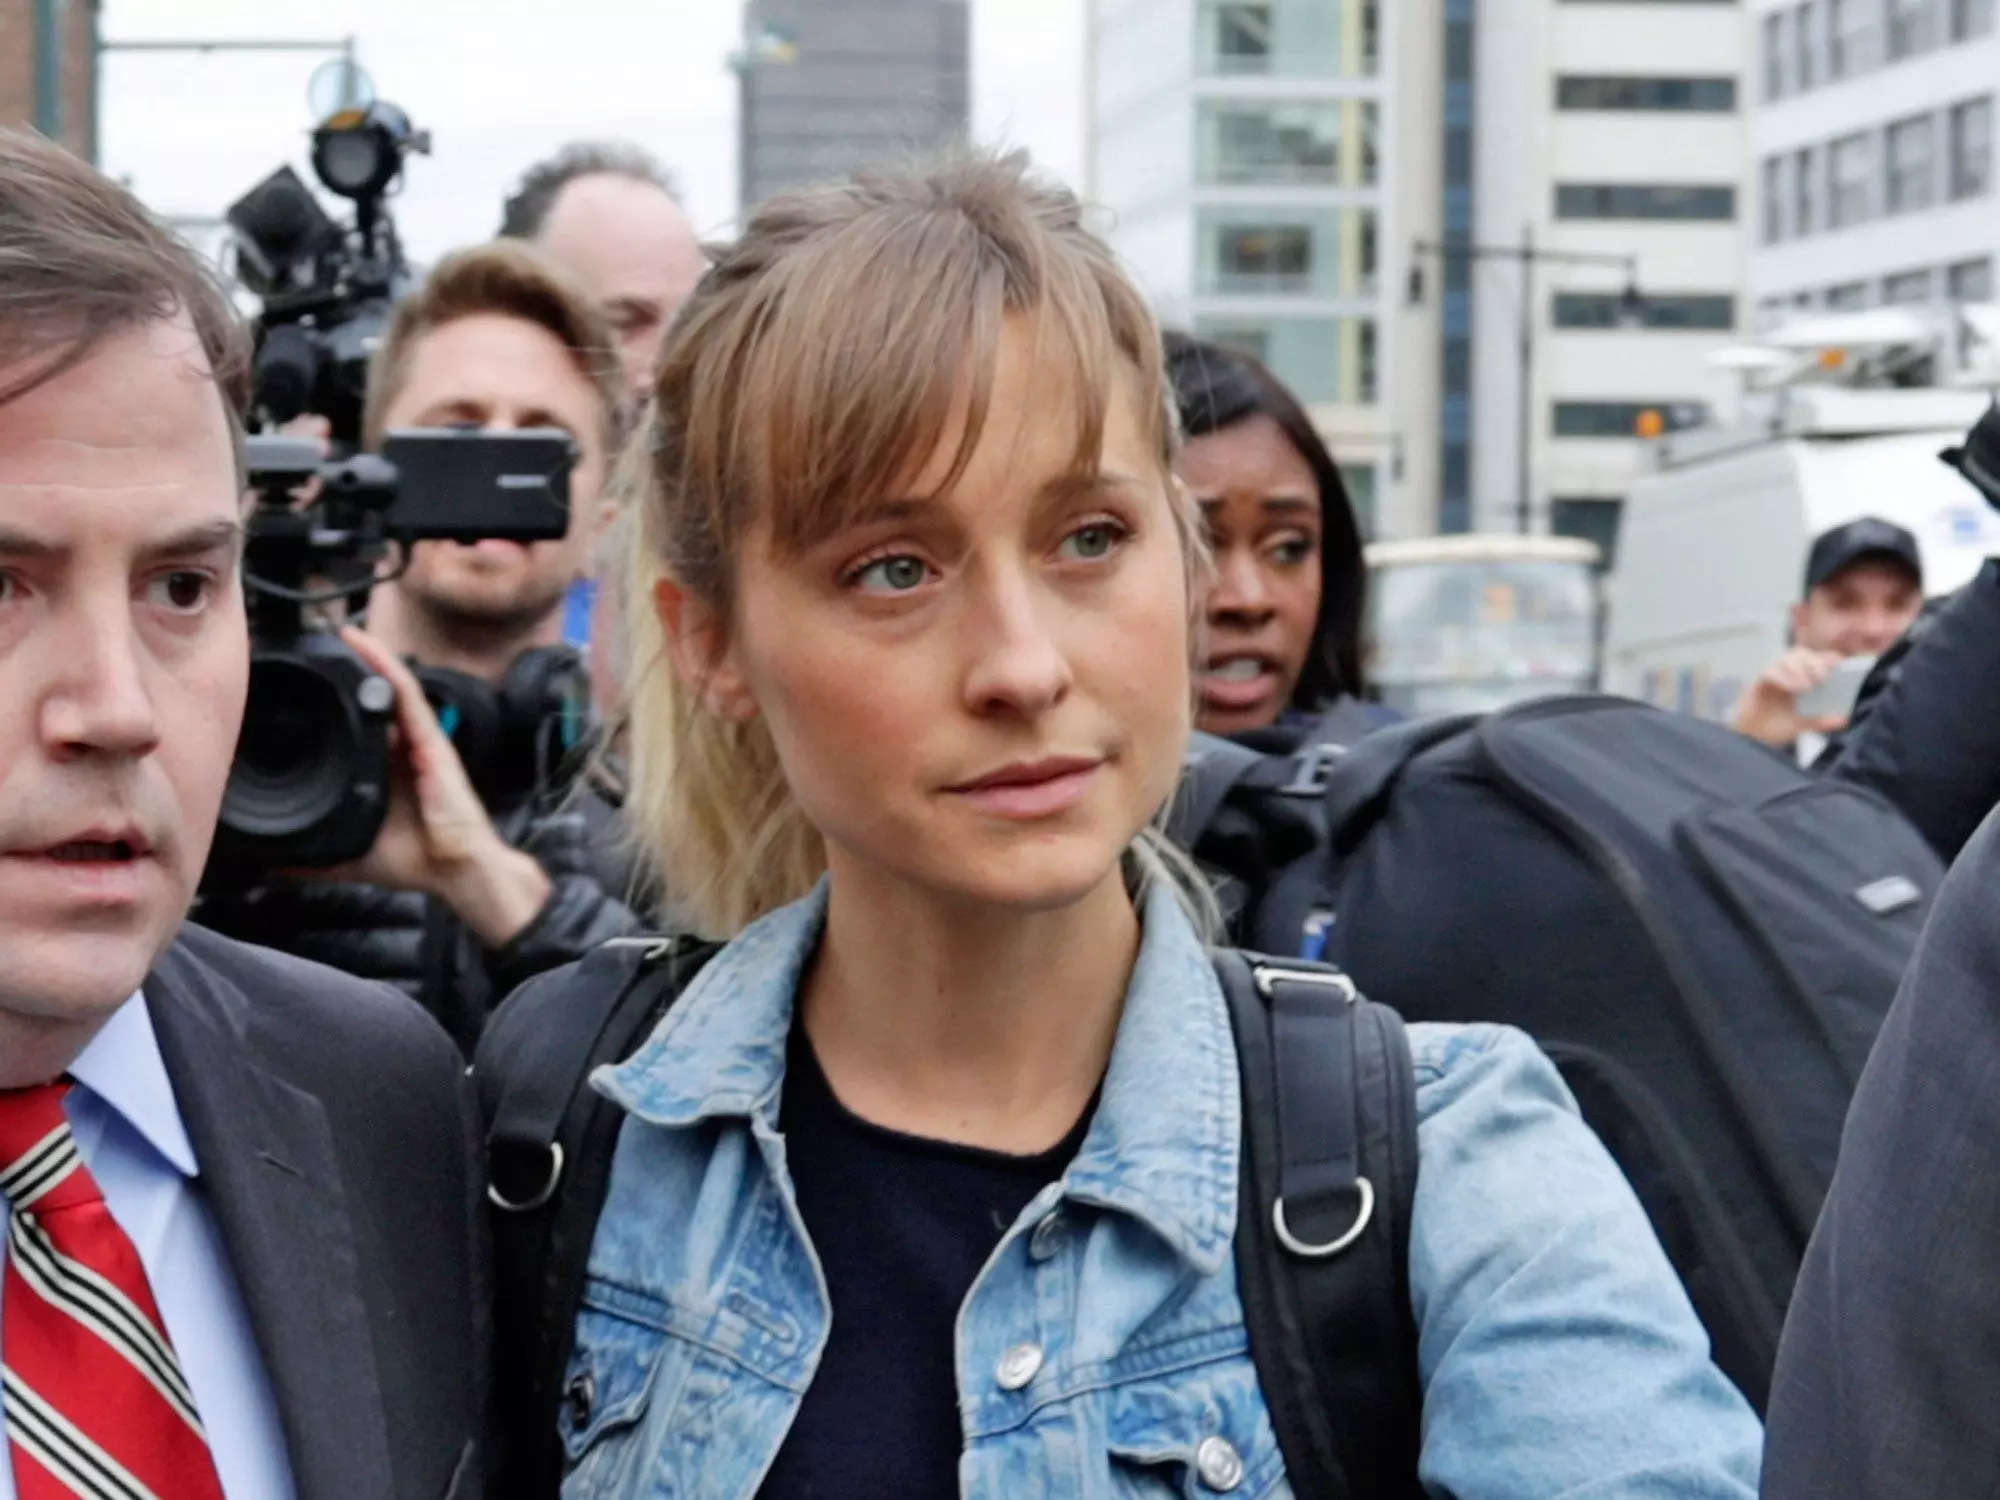 Smallville Actor Allison Mack Said She Joined The Sex Cult Nxivm To Become A Great Actress